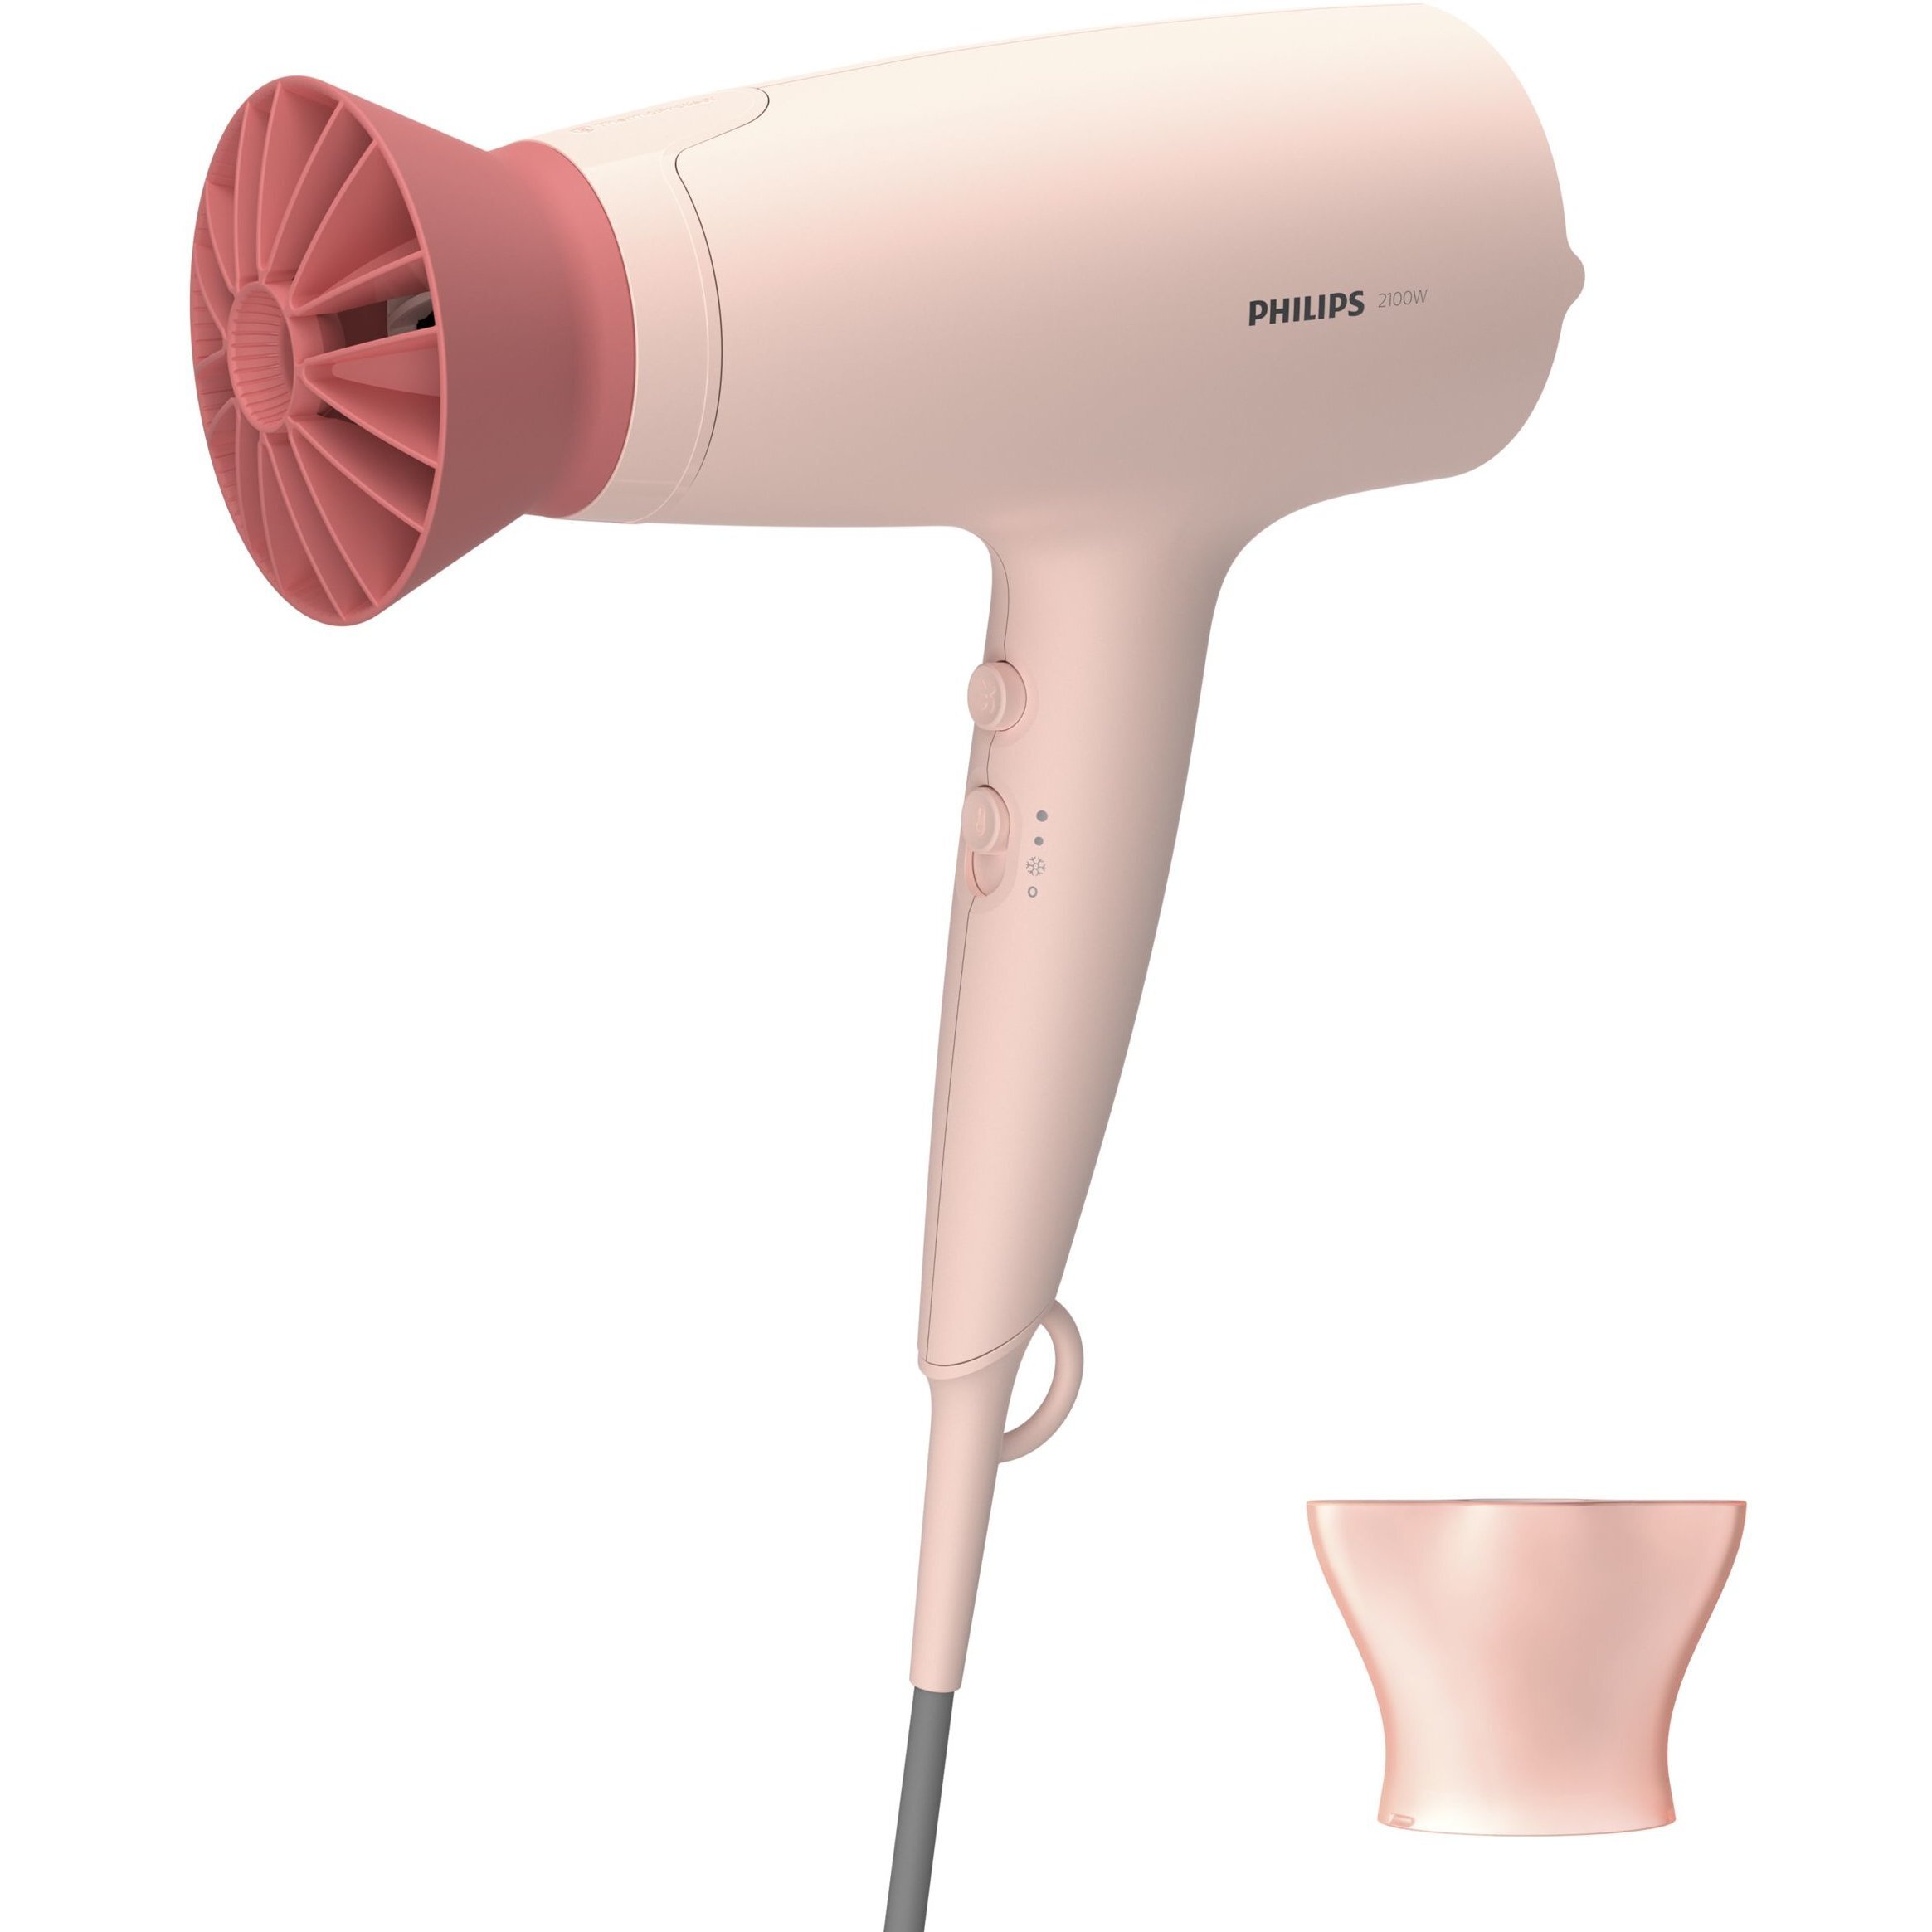 Philips 3000 in prices, buy Series Lviv, BHD342 > Dnepropetrovsk, price (BHD342/10) dryer: Ukraine: Kyiv, stores Odessa - specifications reviews, hair